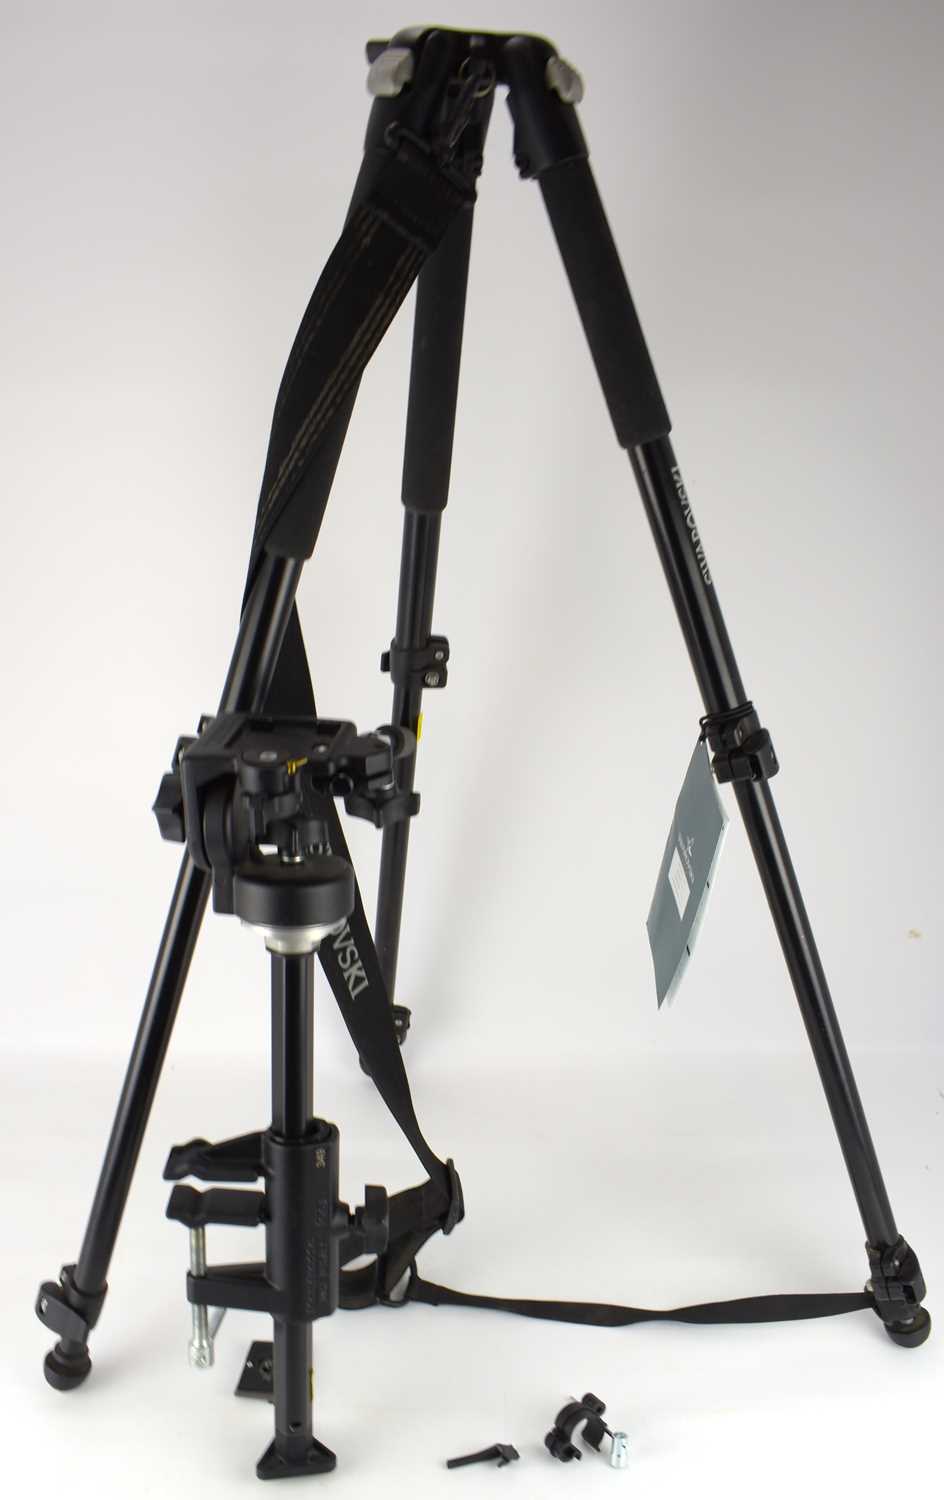 SWAROVSKI OPTIK; a professional tripod and head assembly for spotting scope and cameras, with